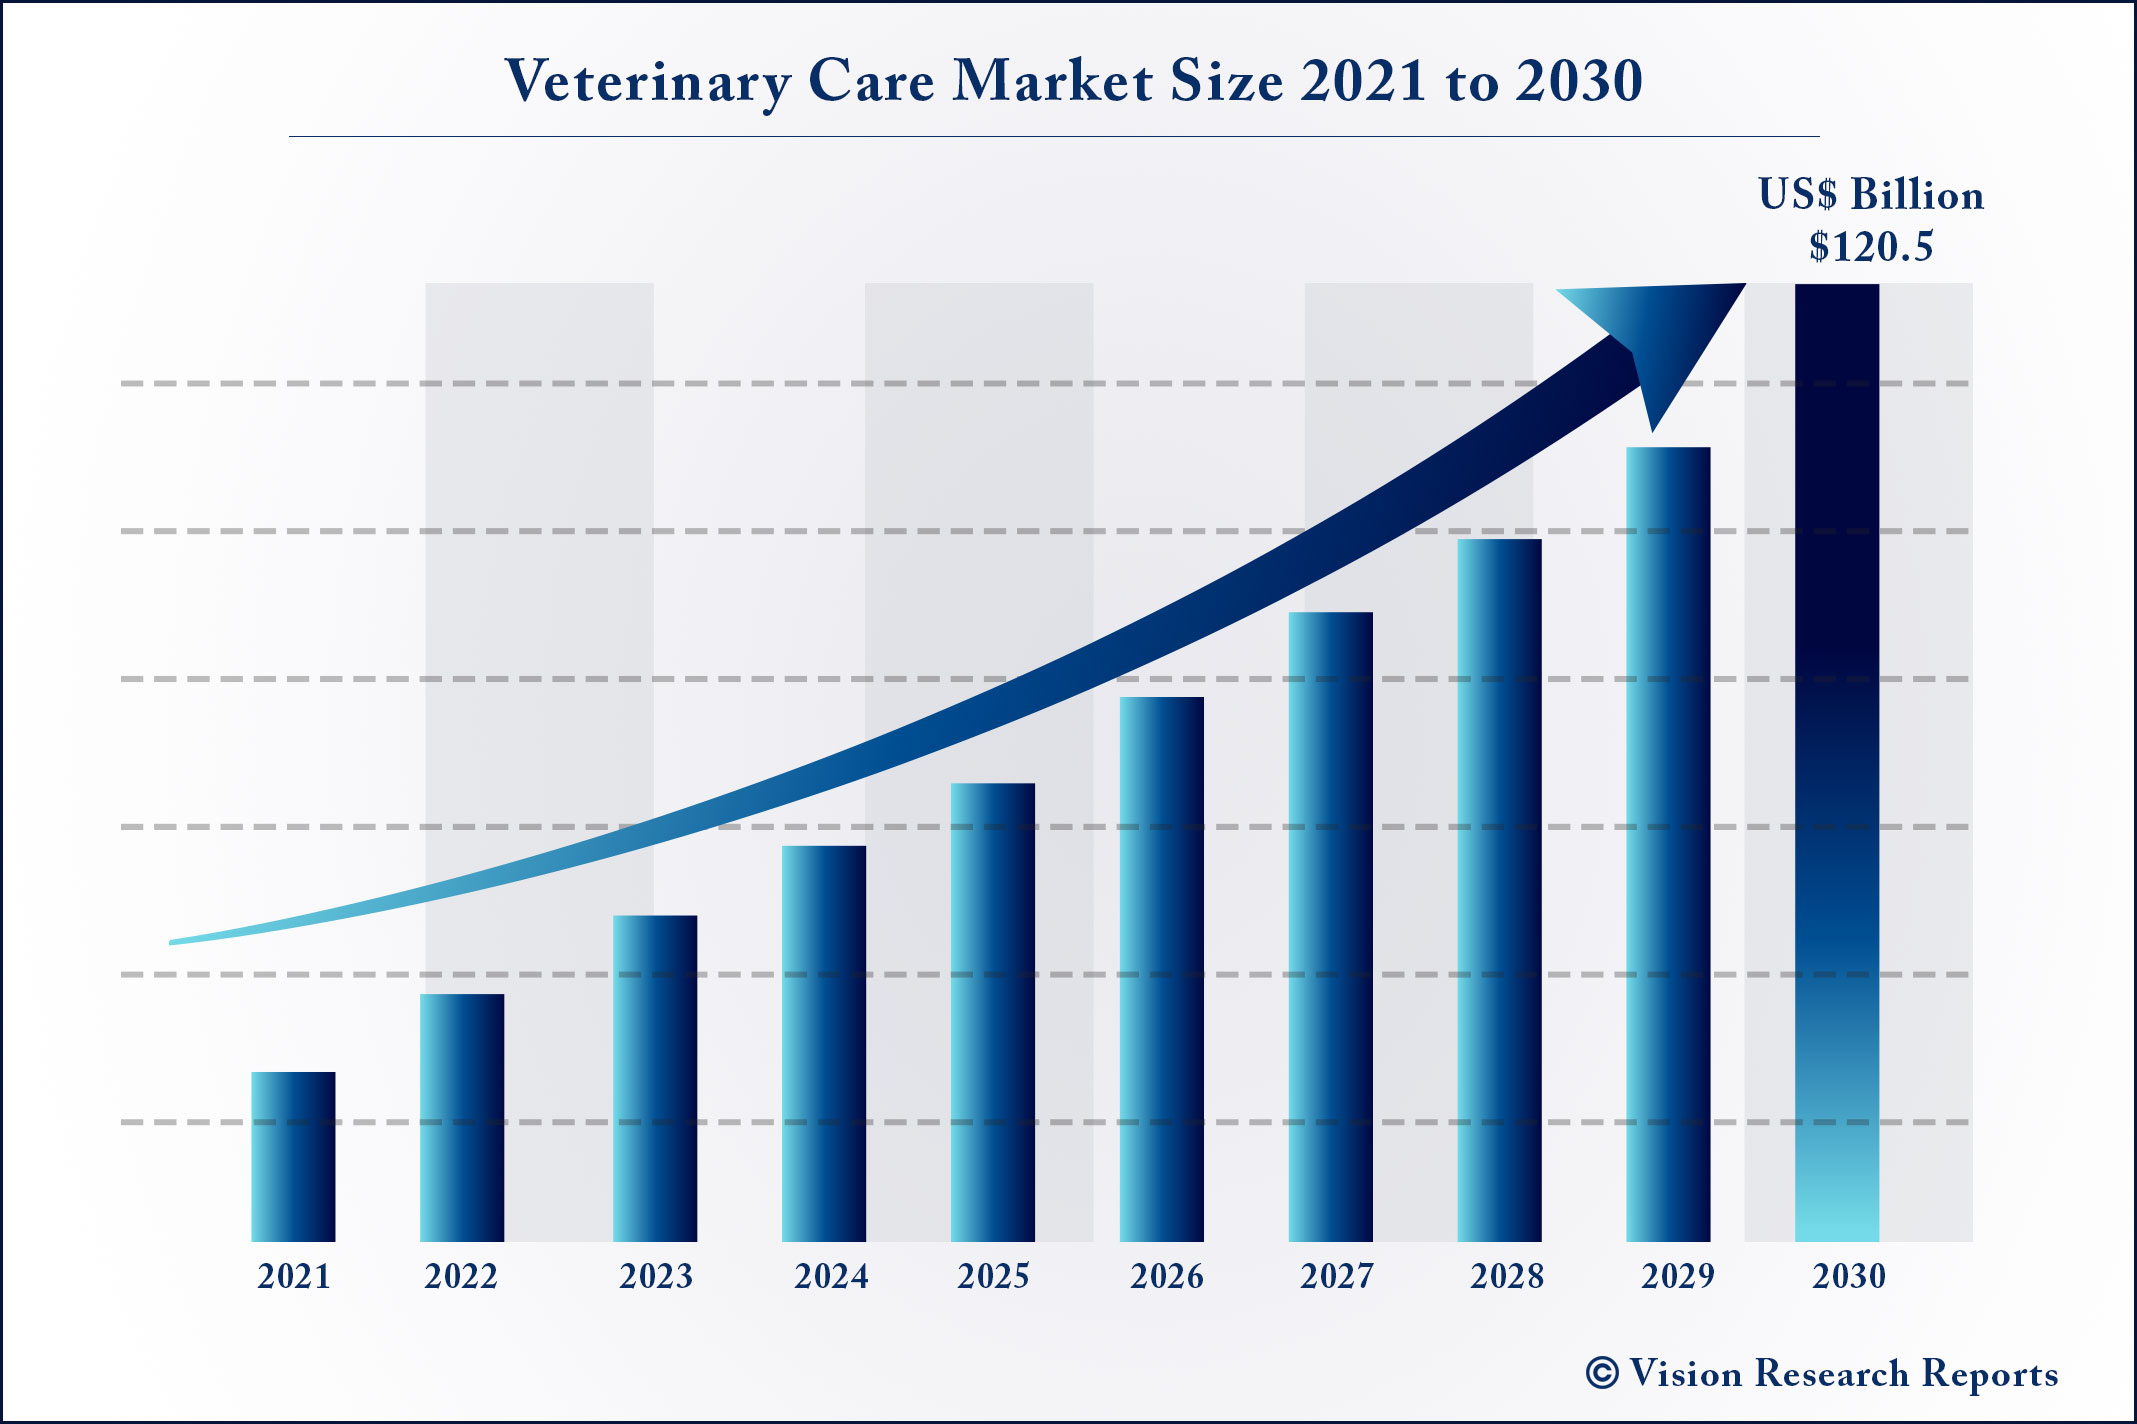 Veterinary Care Market Size 2021 to 2030